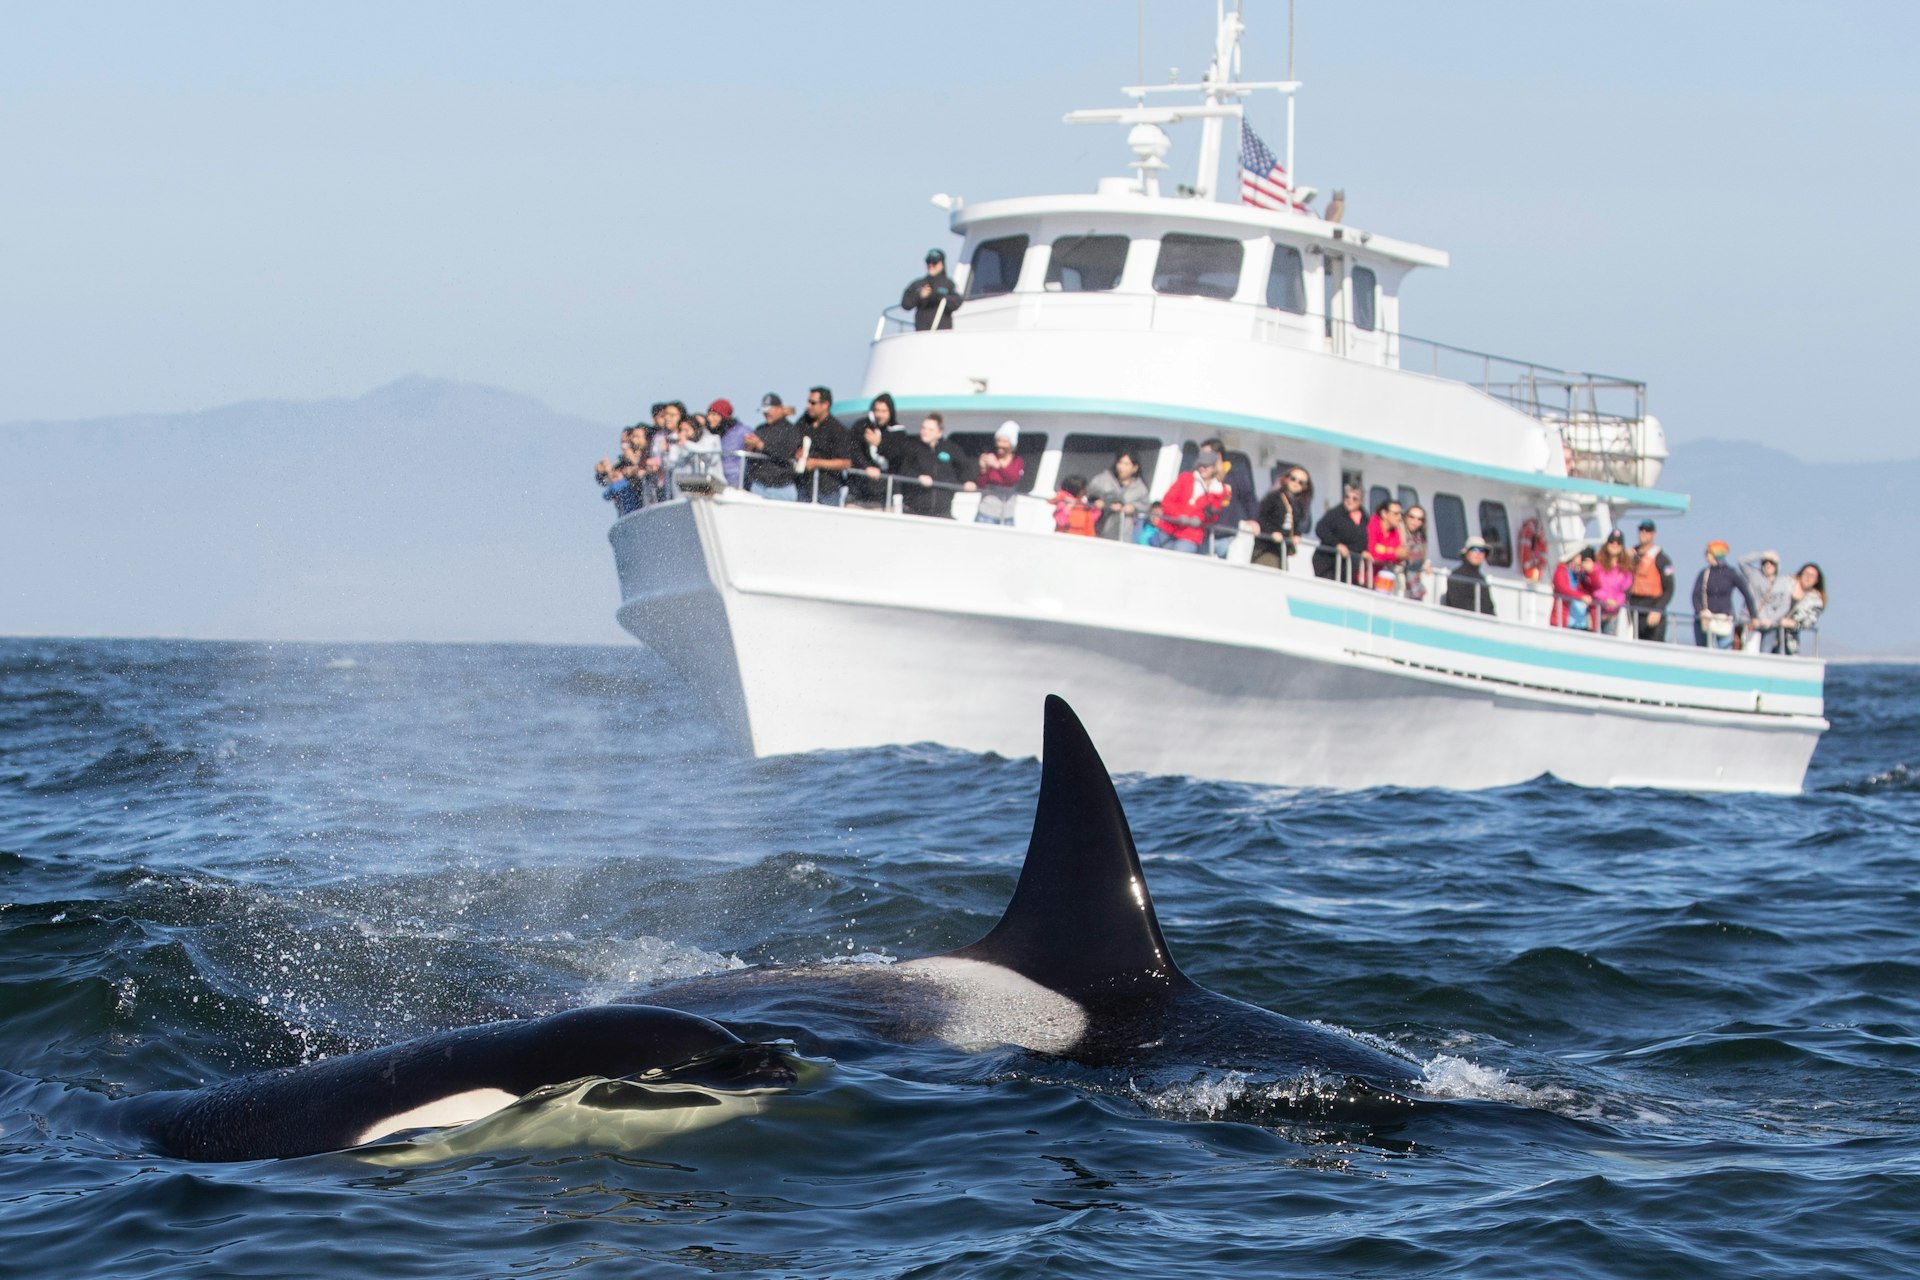 A white tour boat loaded with people near a killer whale out at sea